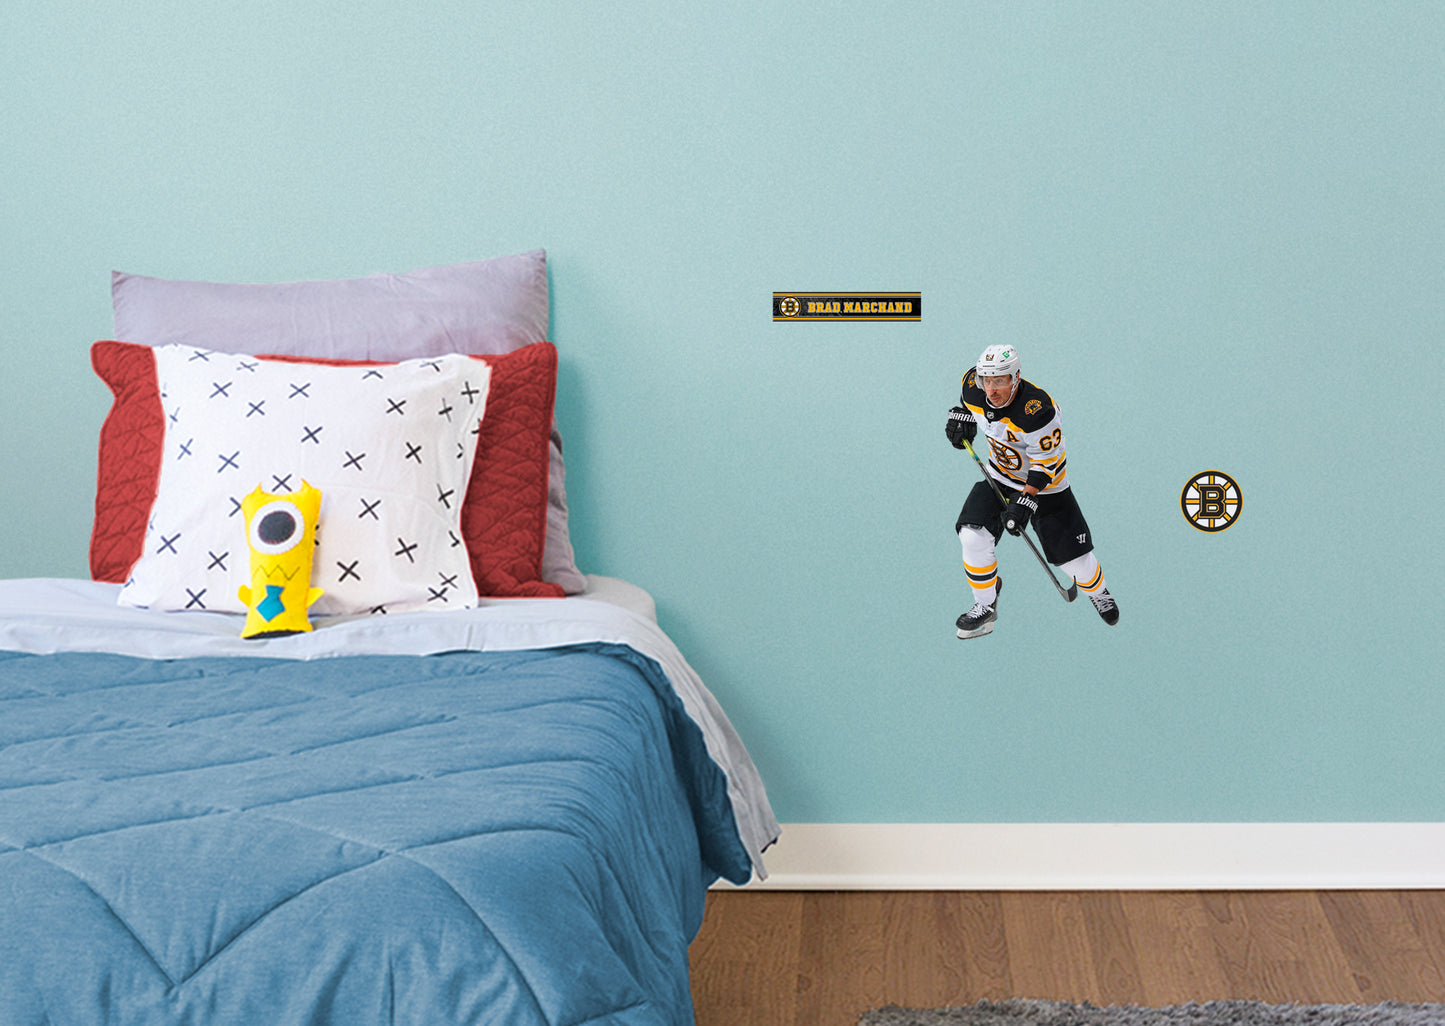 Boston Bruins: Brad Marchand         - Officially Licensed NHL Removable Wall   Adhesive Decal